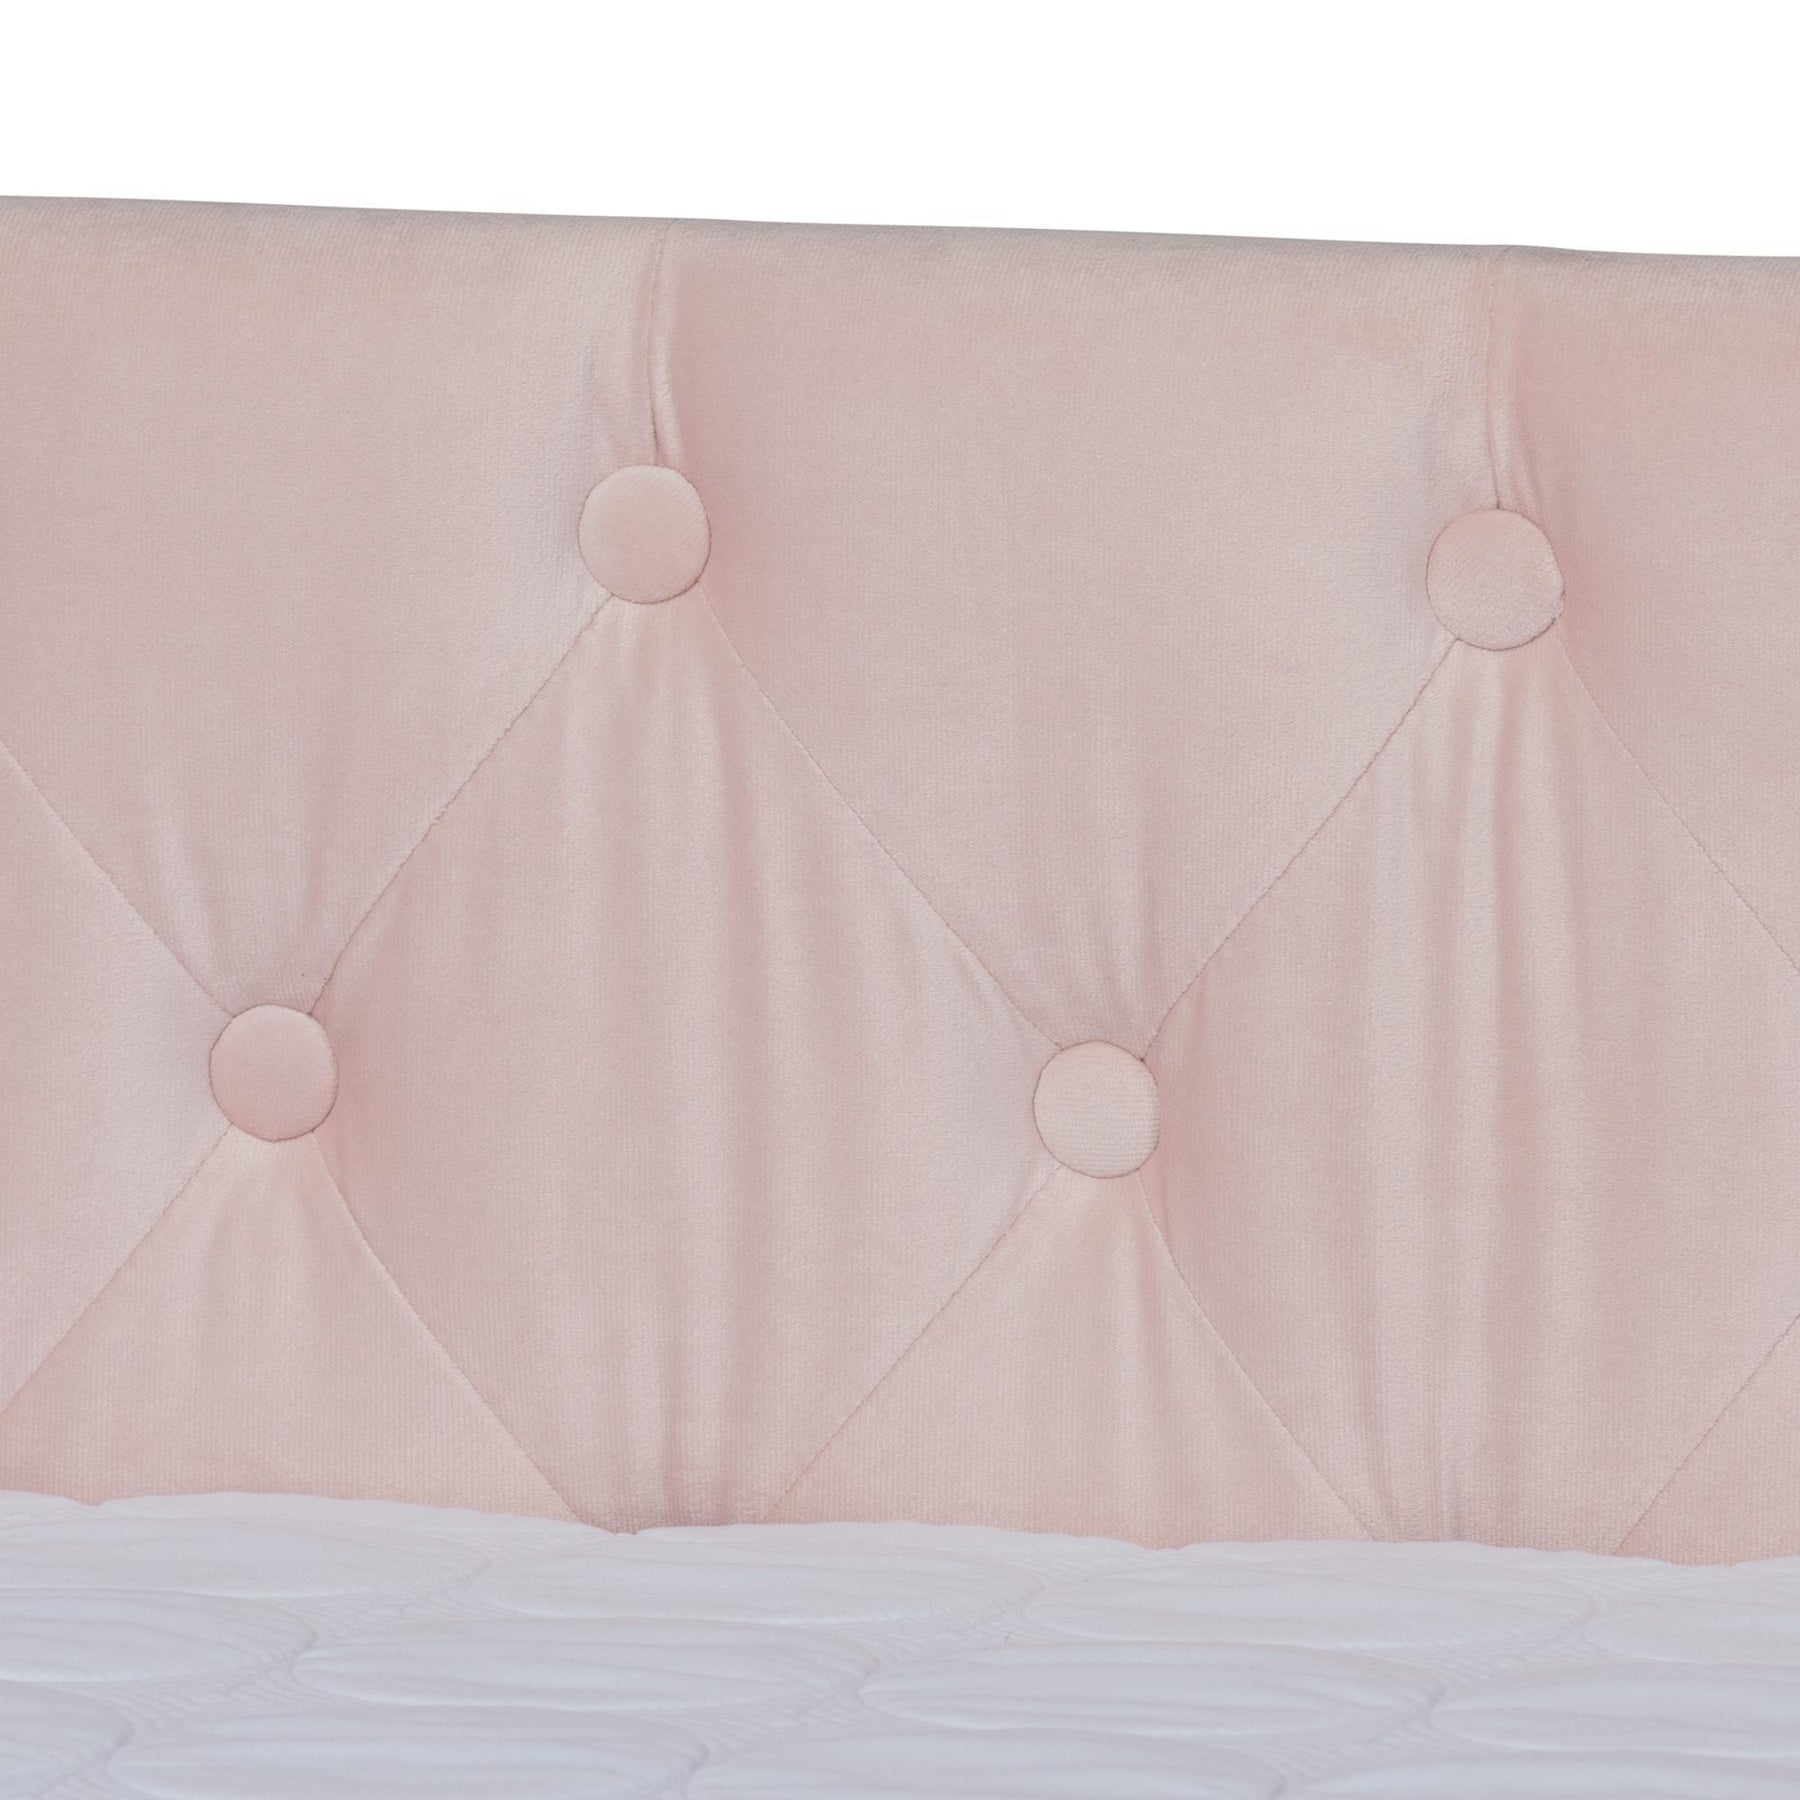 Baxton Studio Raphael Modern And Contemporary Pink Velvet Fabric Upholstered Queen Size Daybed With Trundle - CF9228 -Pink Velvet-Daybed-Q/T